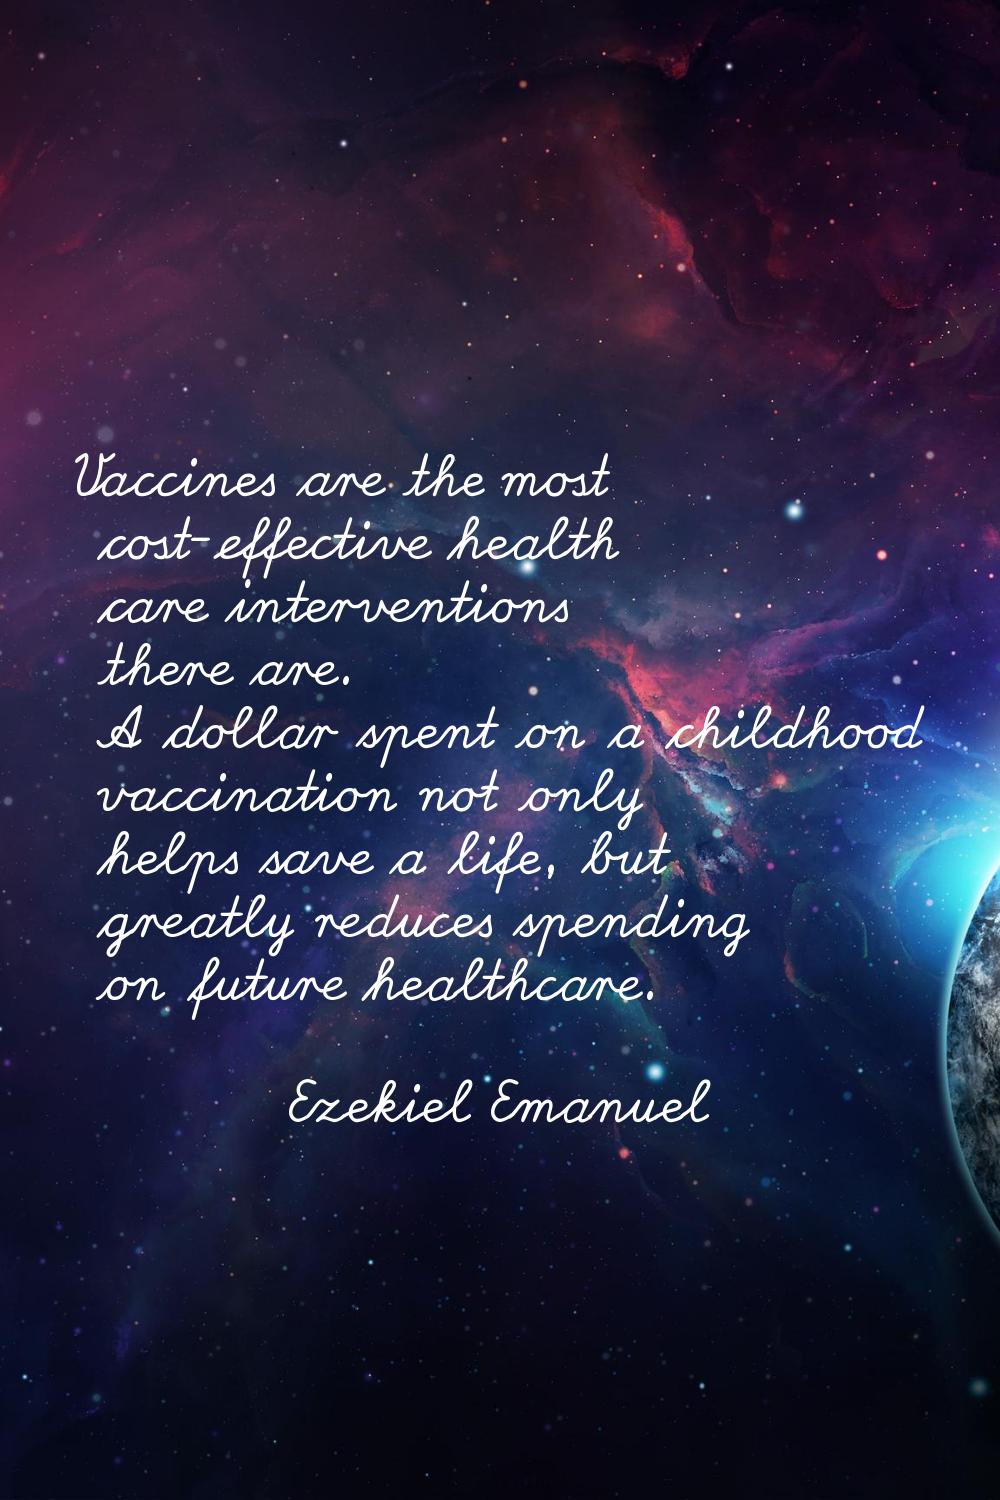 Vaccines are the most cost-effective health care interventions there are. A dollar spent on a child